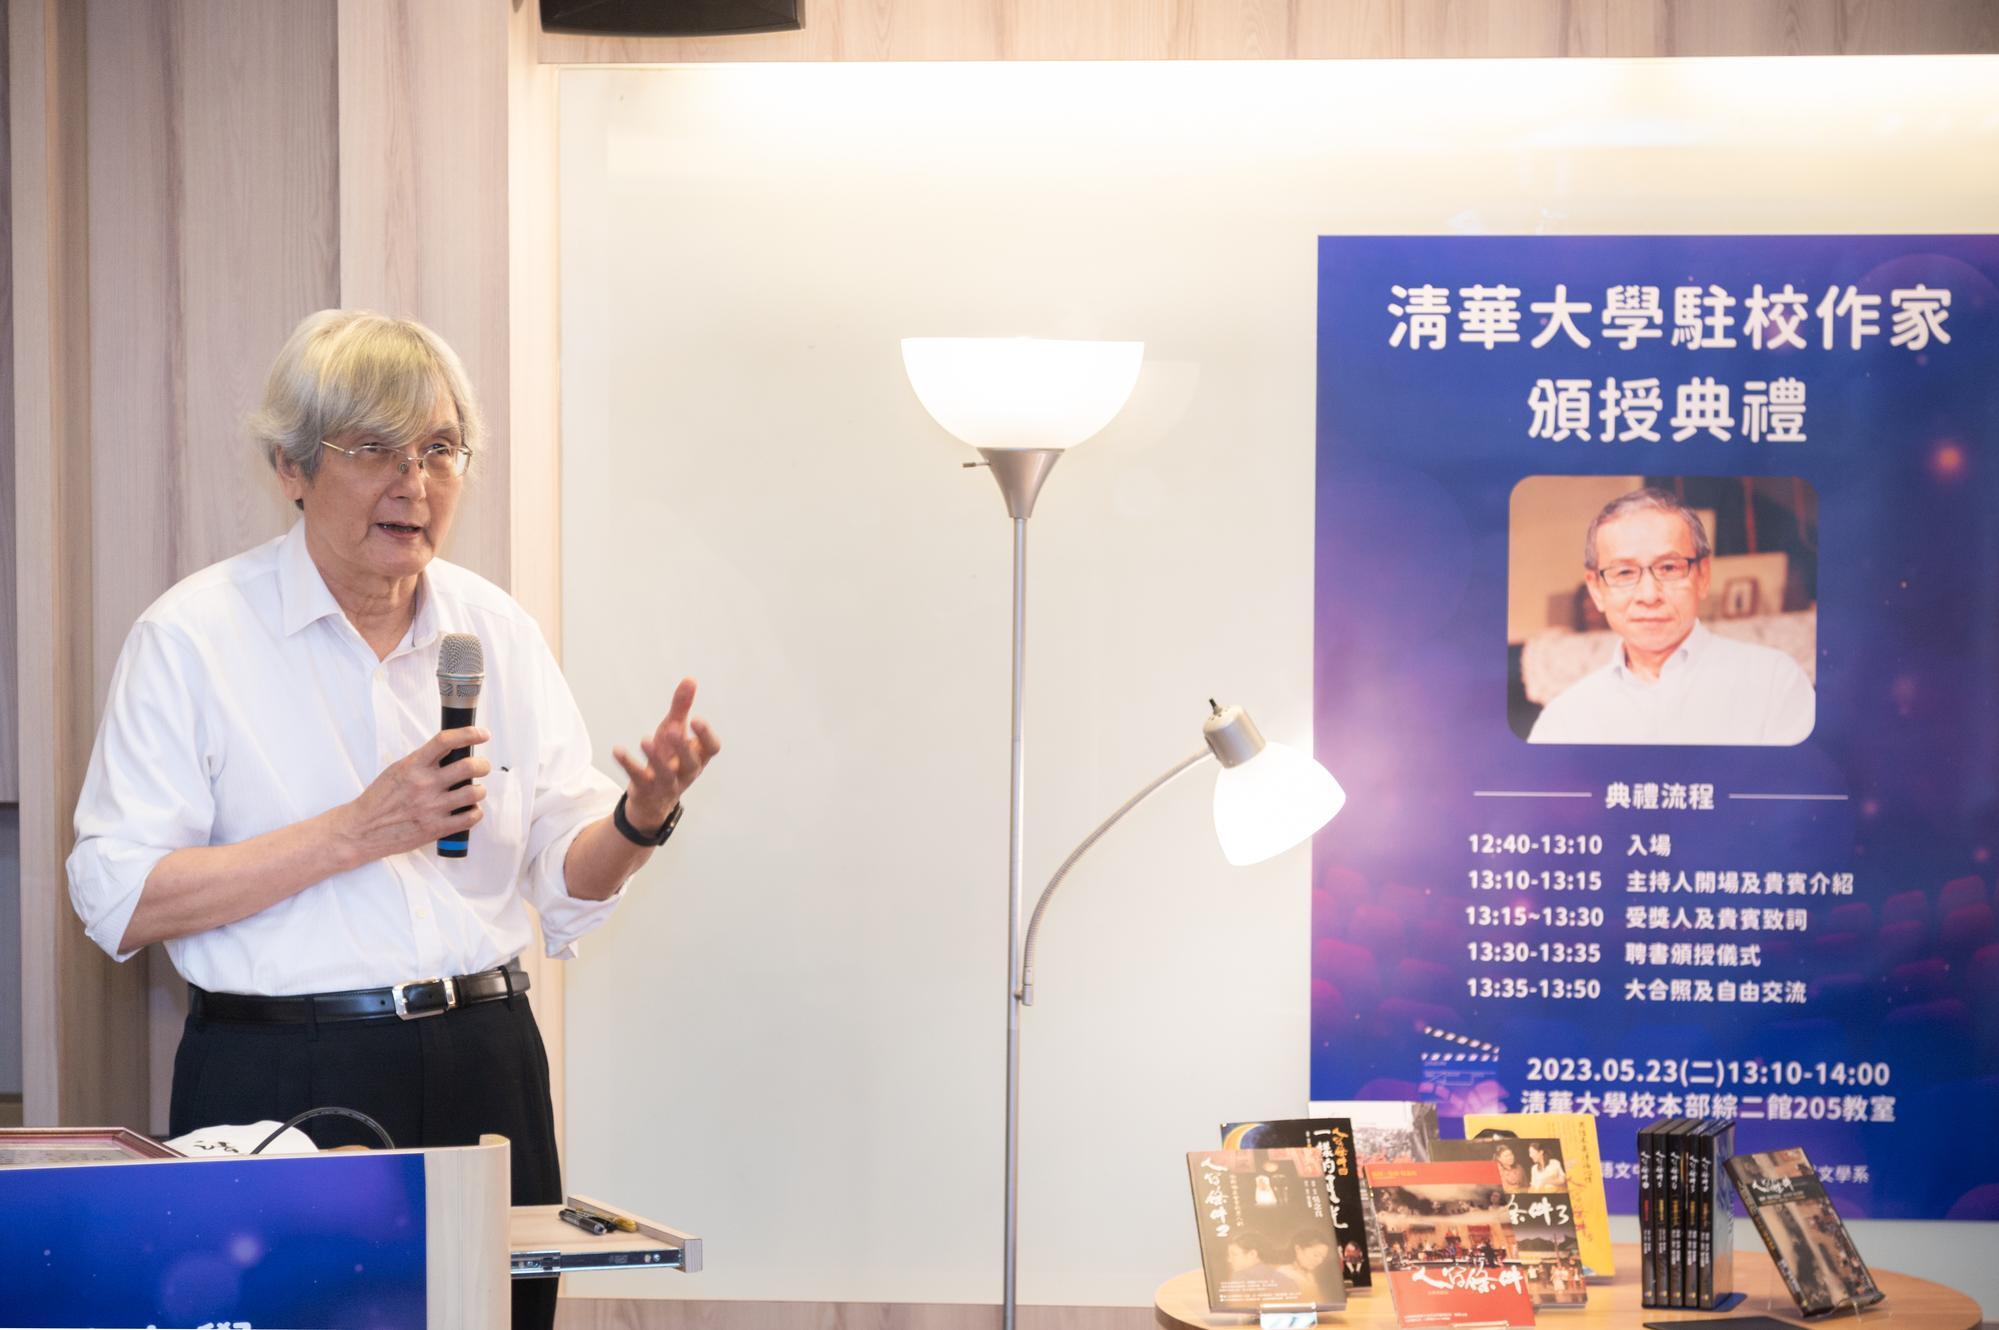 Ying-chun Tsai (蔡英俊), director of the Center for Language Education, plays a key role in inviting Nien-jen Wu (吳念真) to be NTHU 2023 writer-in-residence.